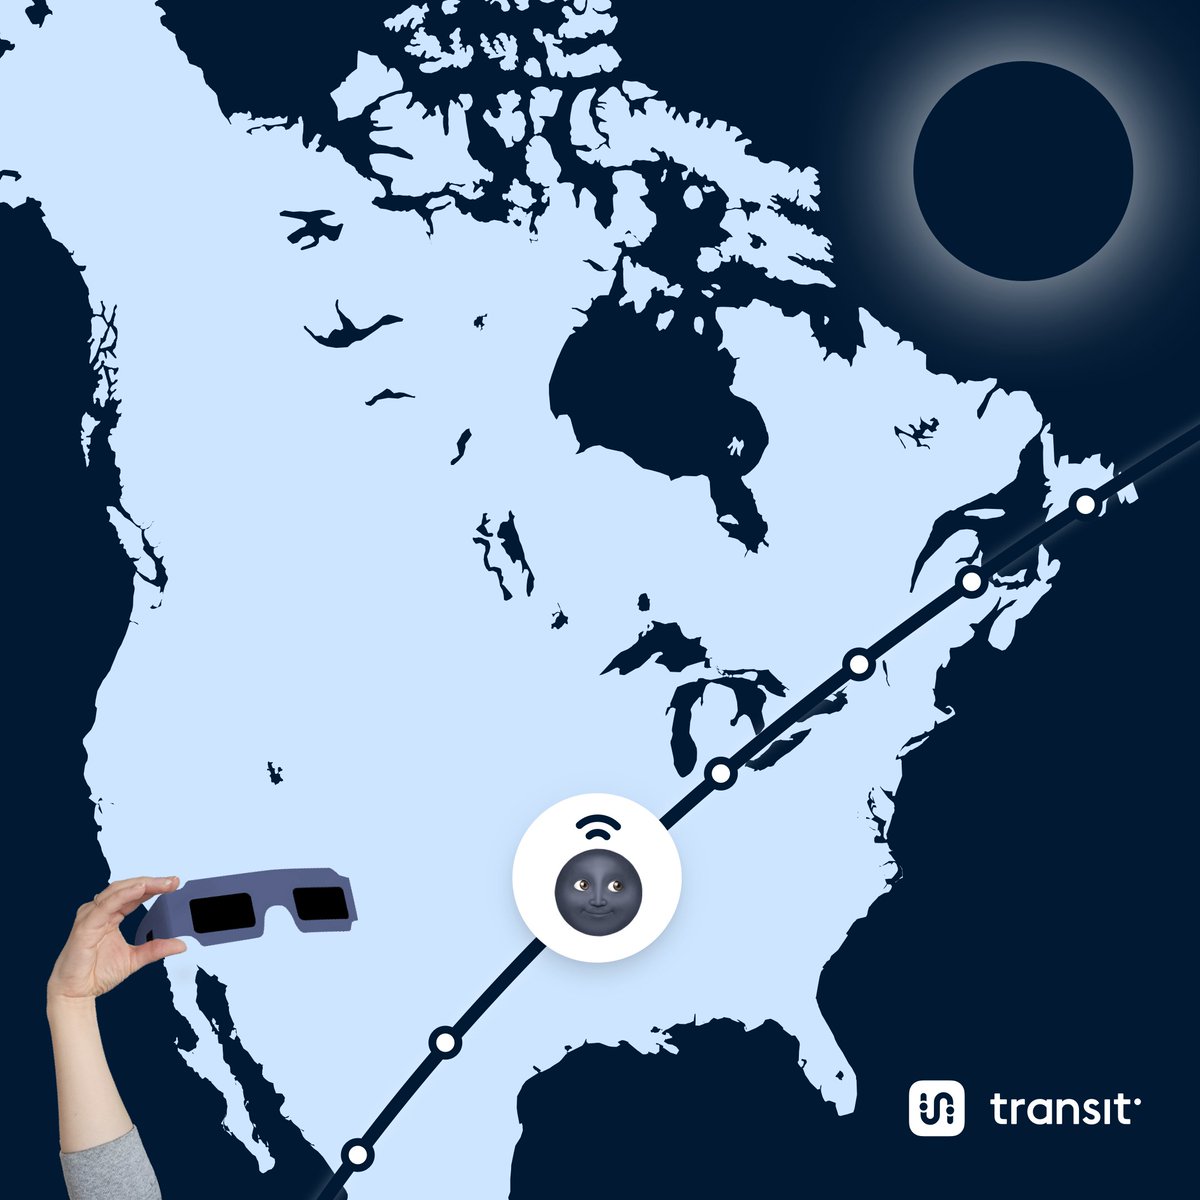 POV: the solar system's going to pull off a perfectly-timed transfer Catch the moon make its mid-day pit stop: 🧡 Laval: métro downtown! 🚊 Toronto: GO train to Oakville! 🚍 San Antonio: take the 93 to UTSA! 😎‍ Everyone else: get those ISO-approved shades ready...